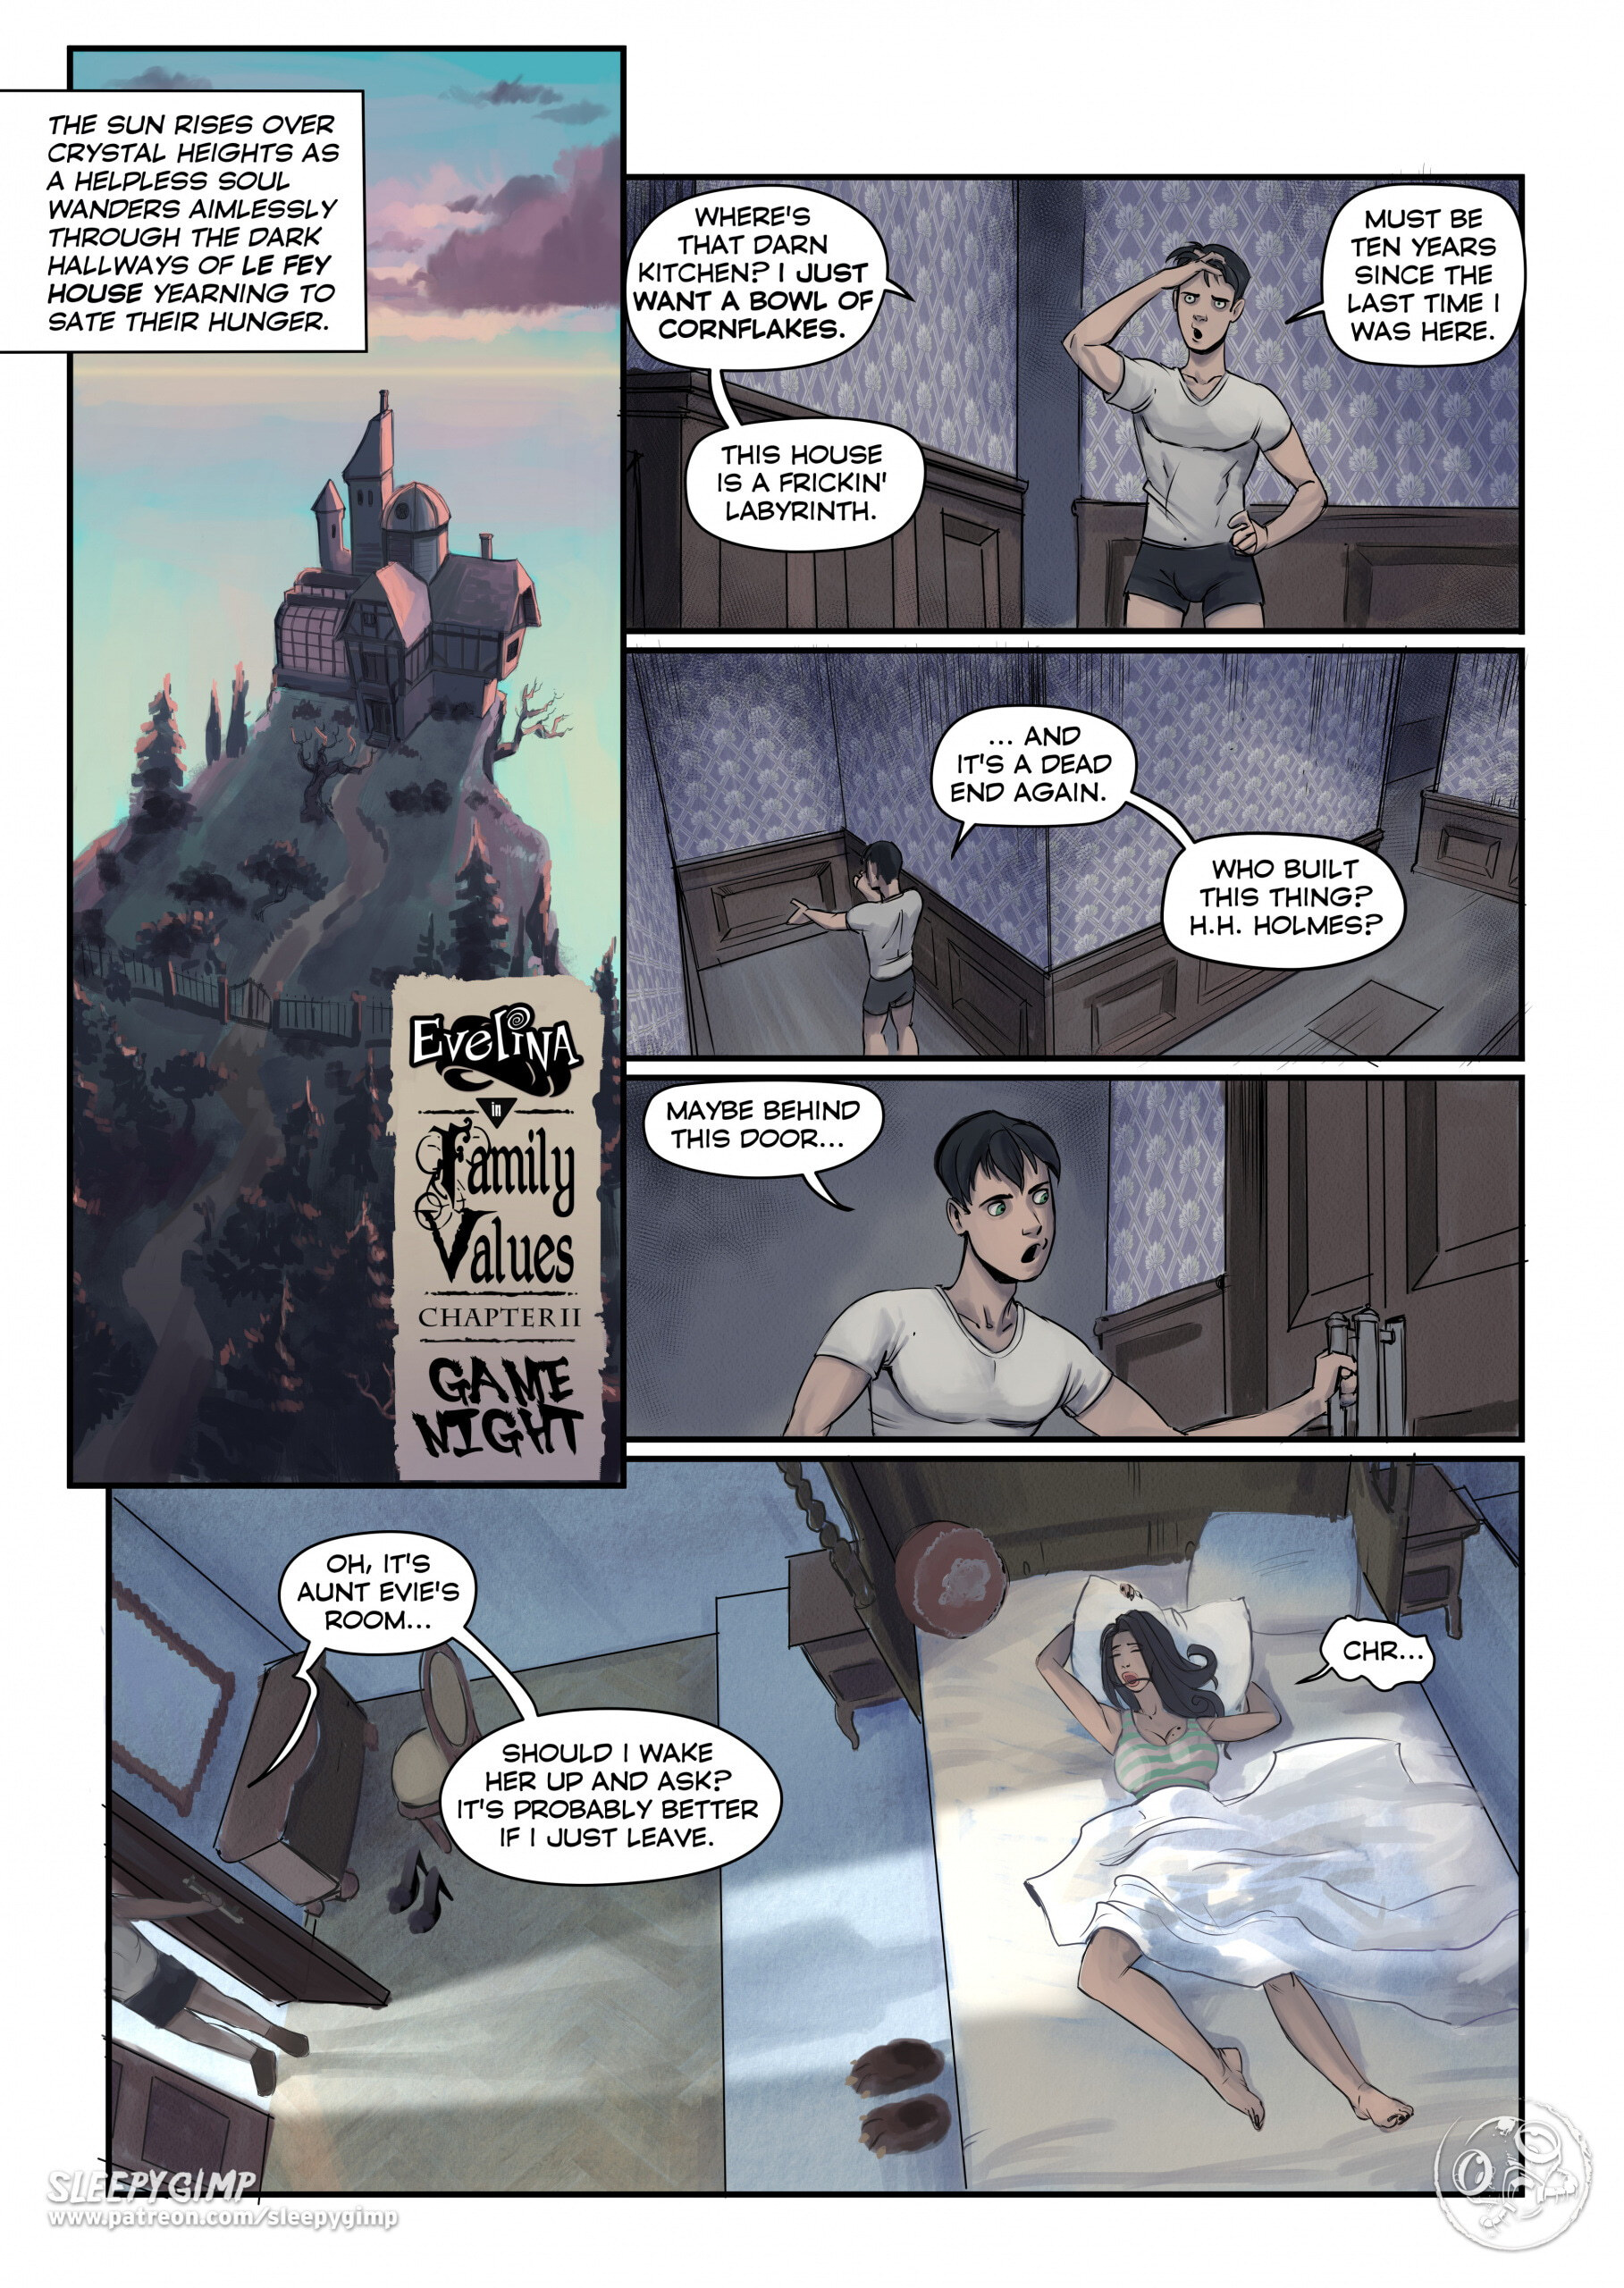 Family Values - Page 2